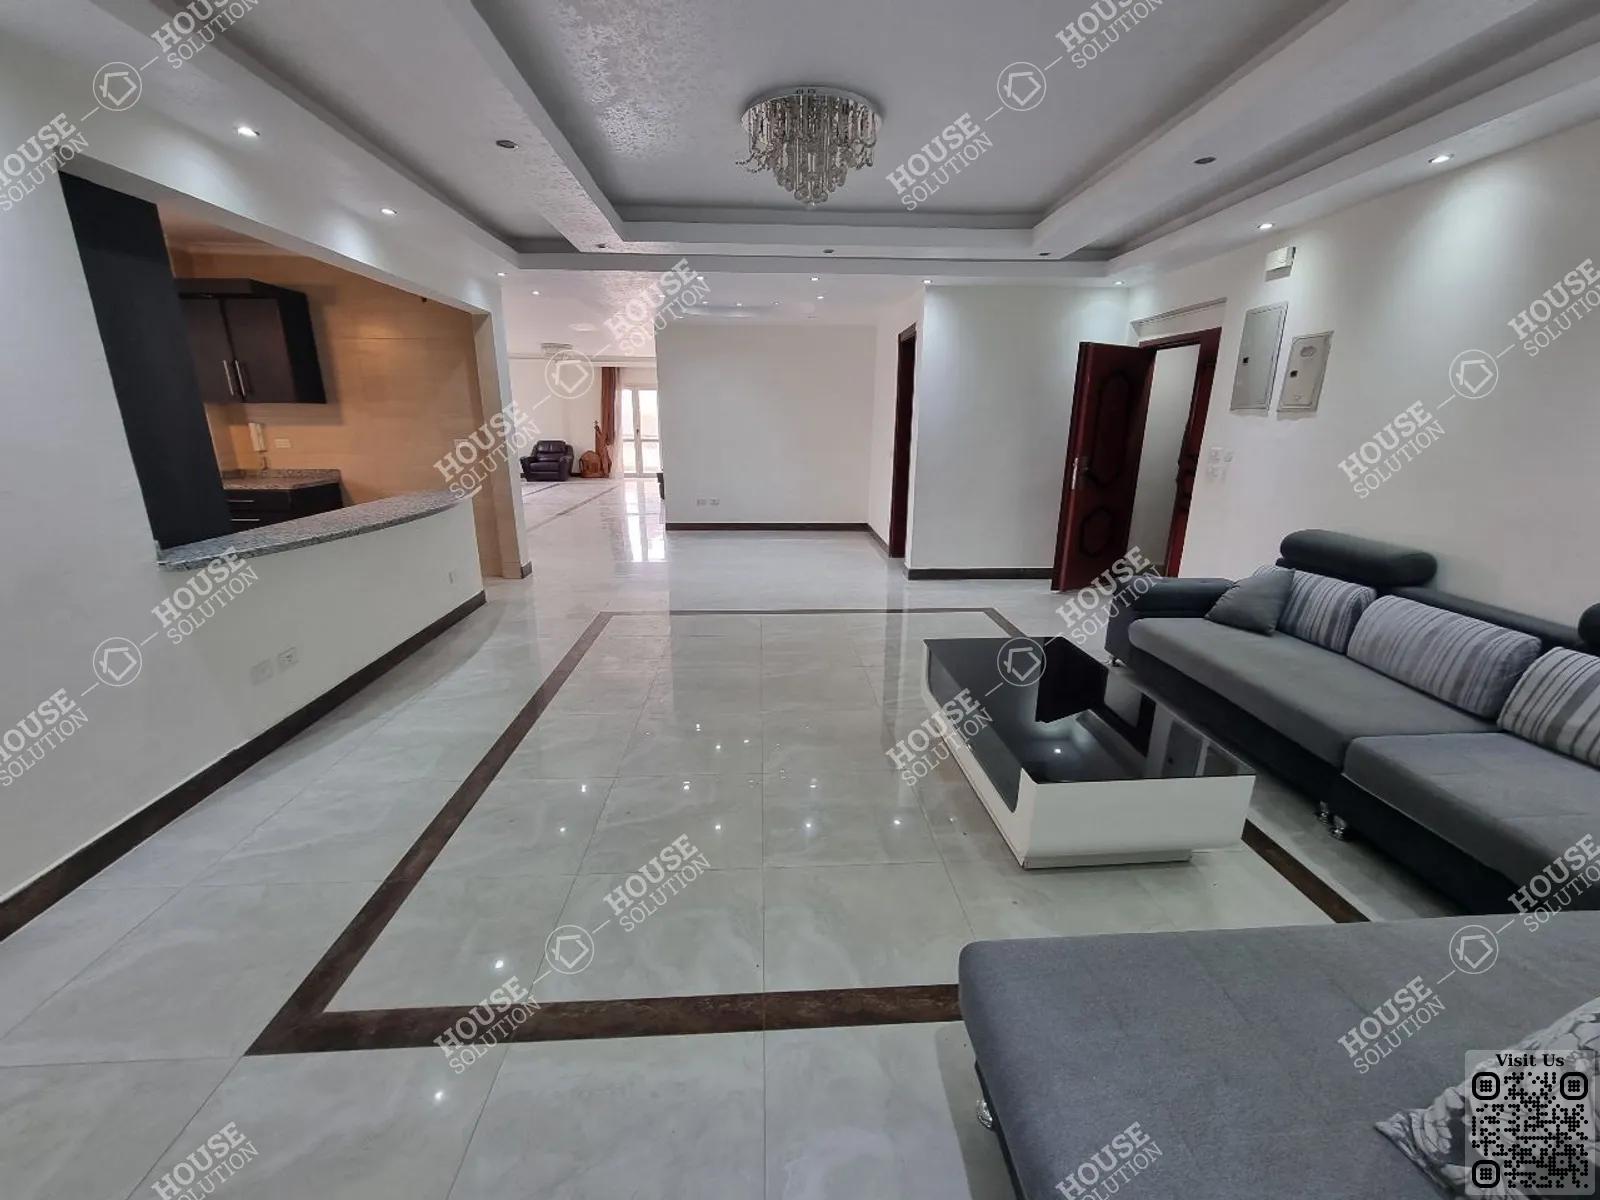 RECEPTION  @ Apartments For Rent In Maadi Maadi Sarayat Area: 220 m² consists of 3 Bedrooms 3 Bathrooms Modern furnished 5 stars #4539-0